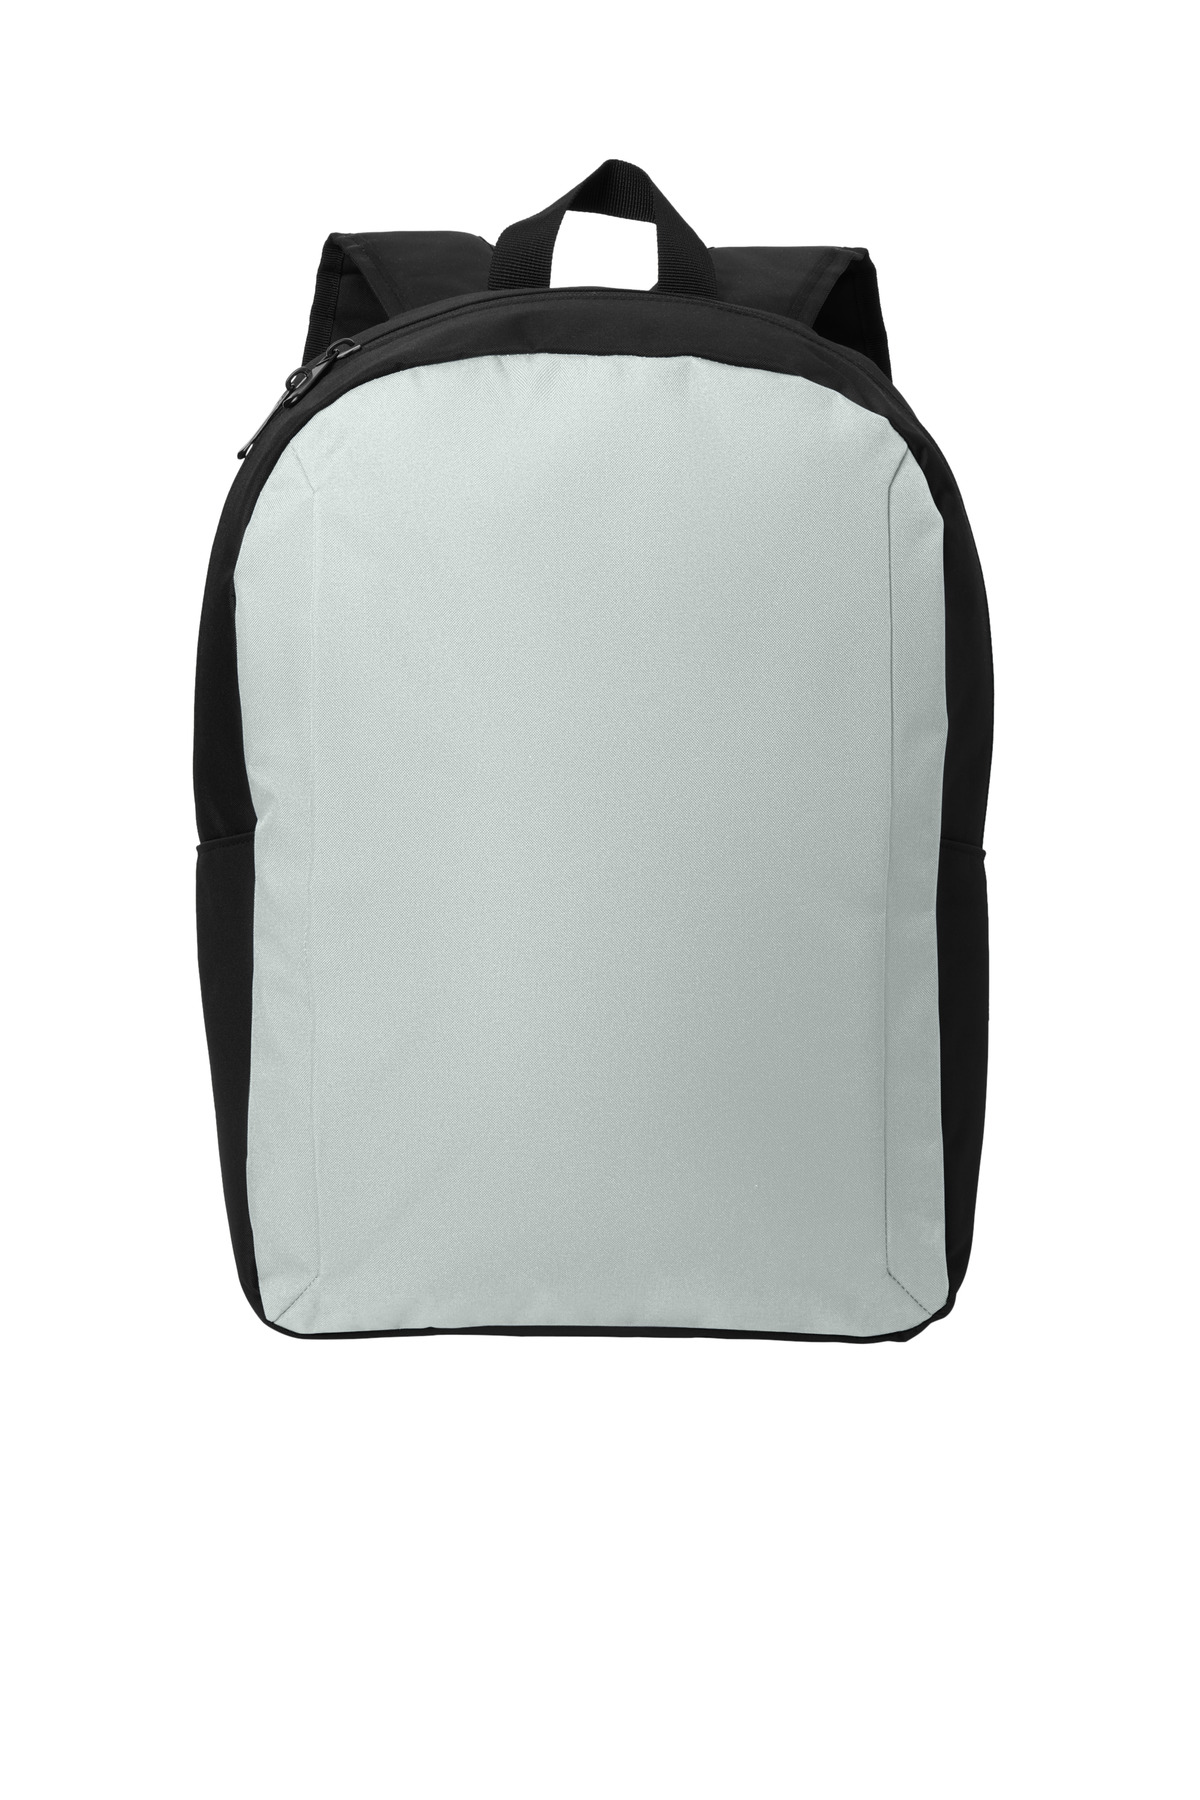 Port Authority Modern Backpack-Port Authority